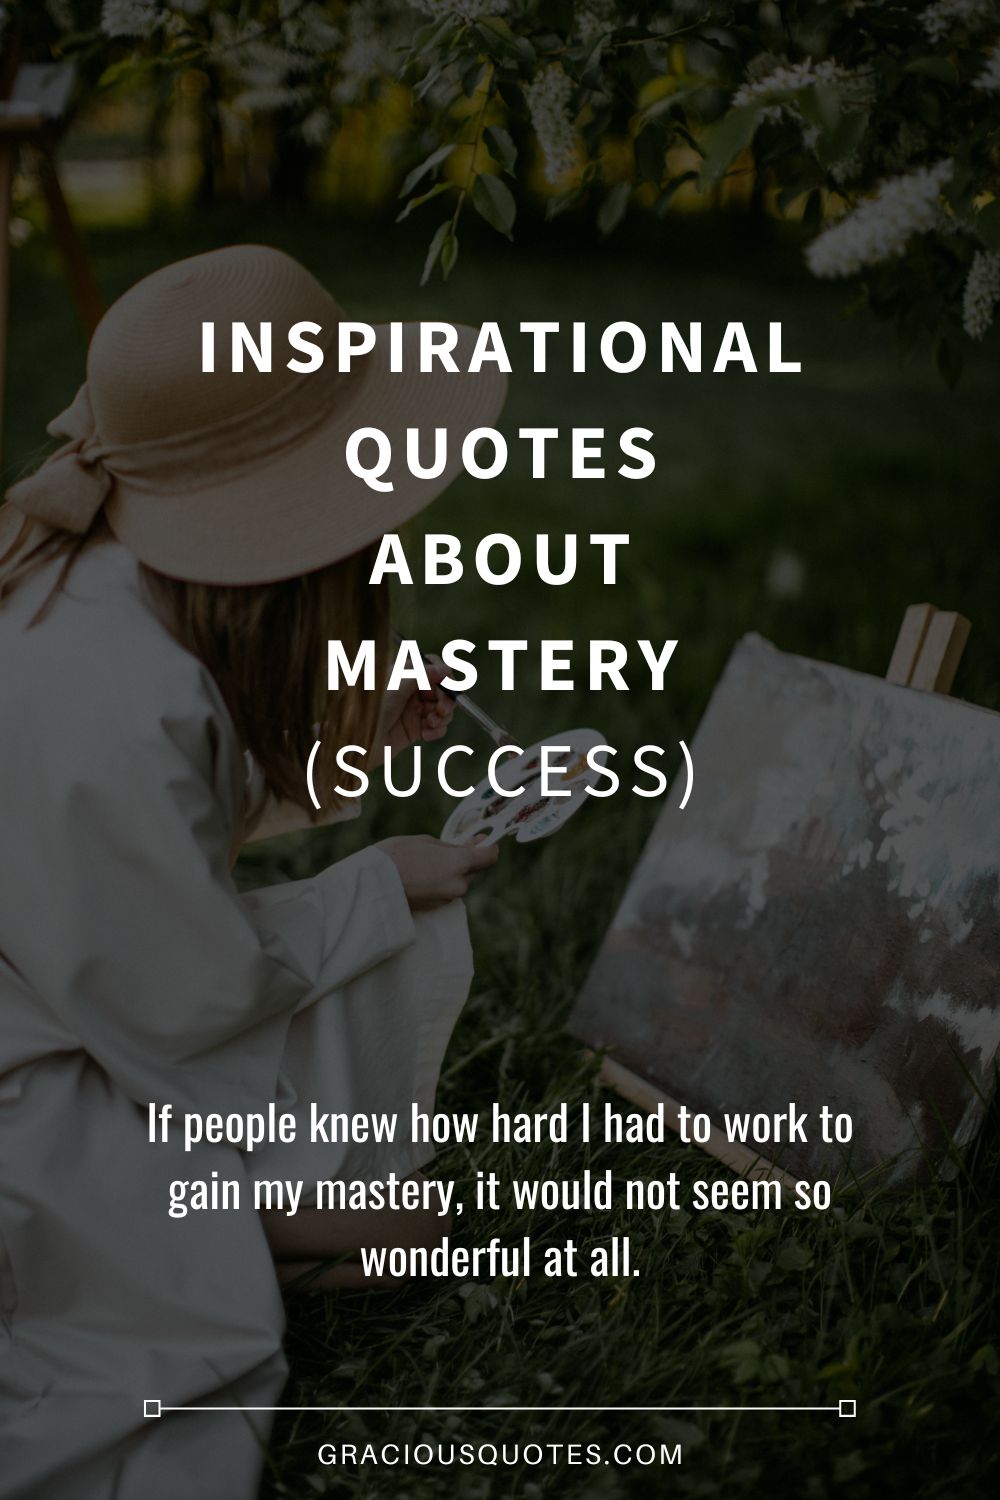 Inspirational Quotes About Mastery (SUCCESS) - Gracious Quotes